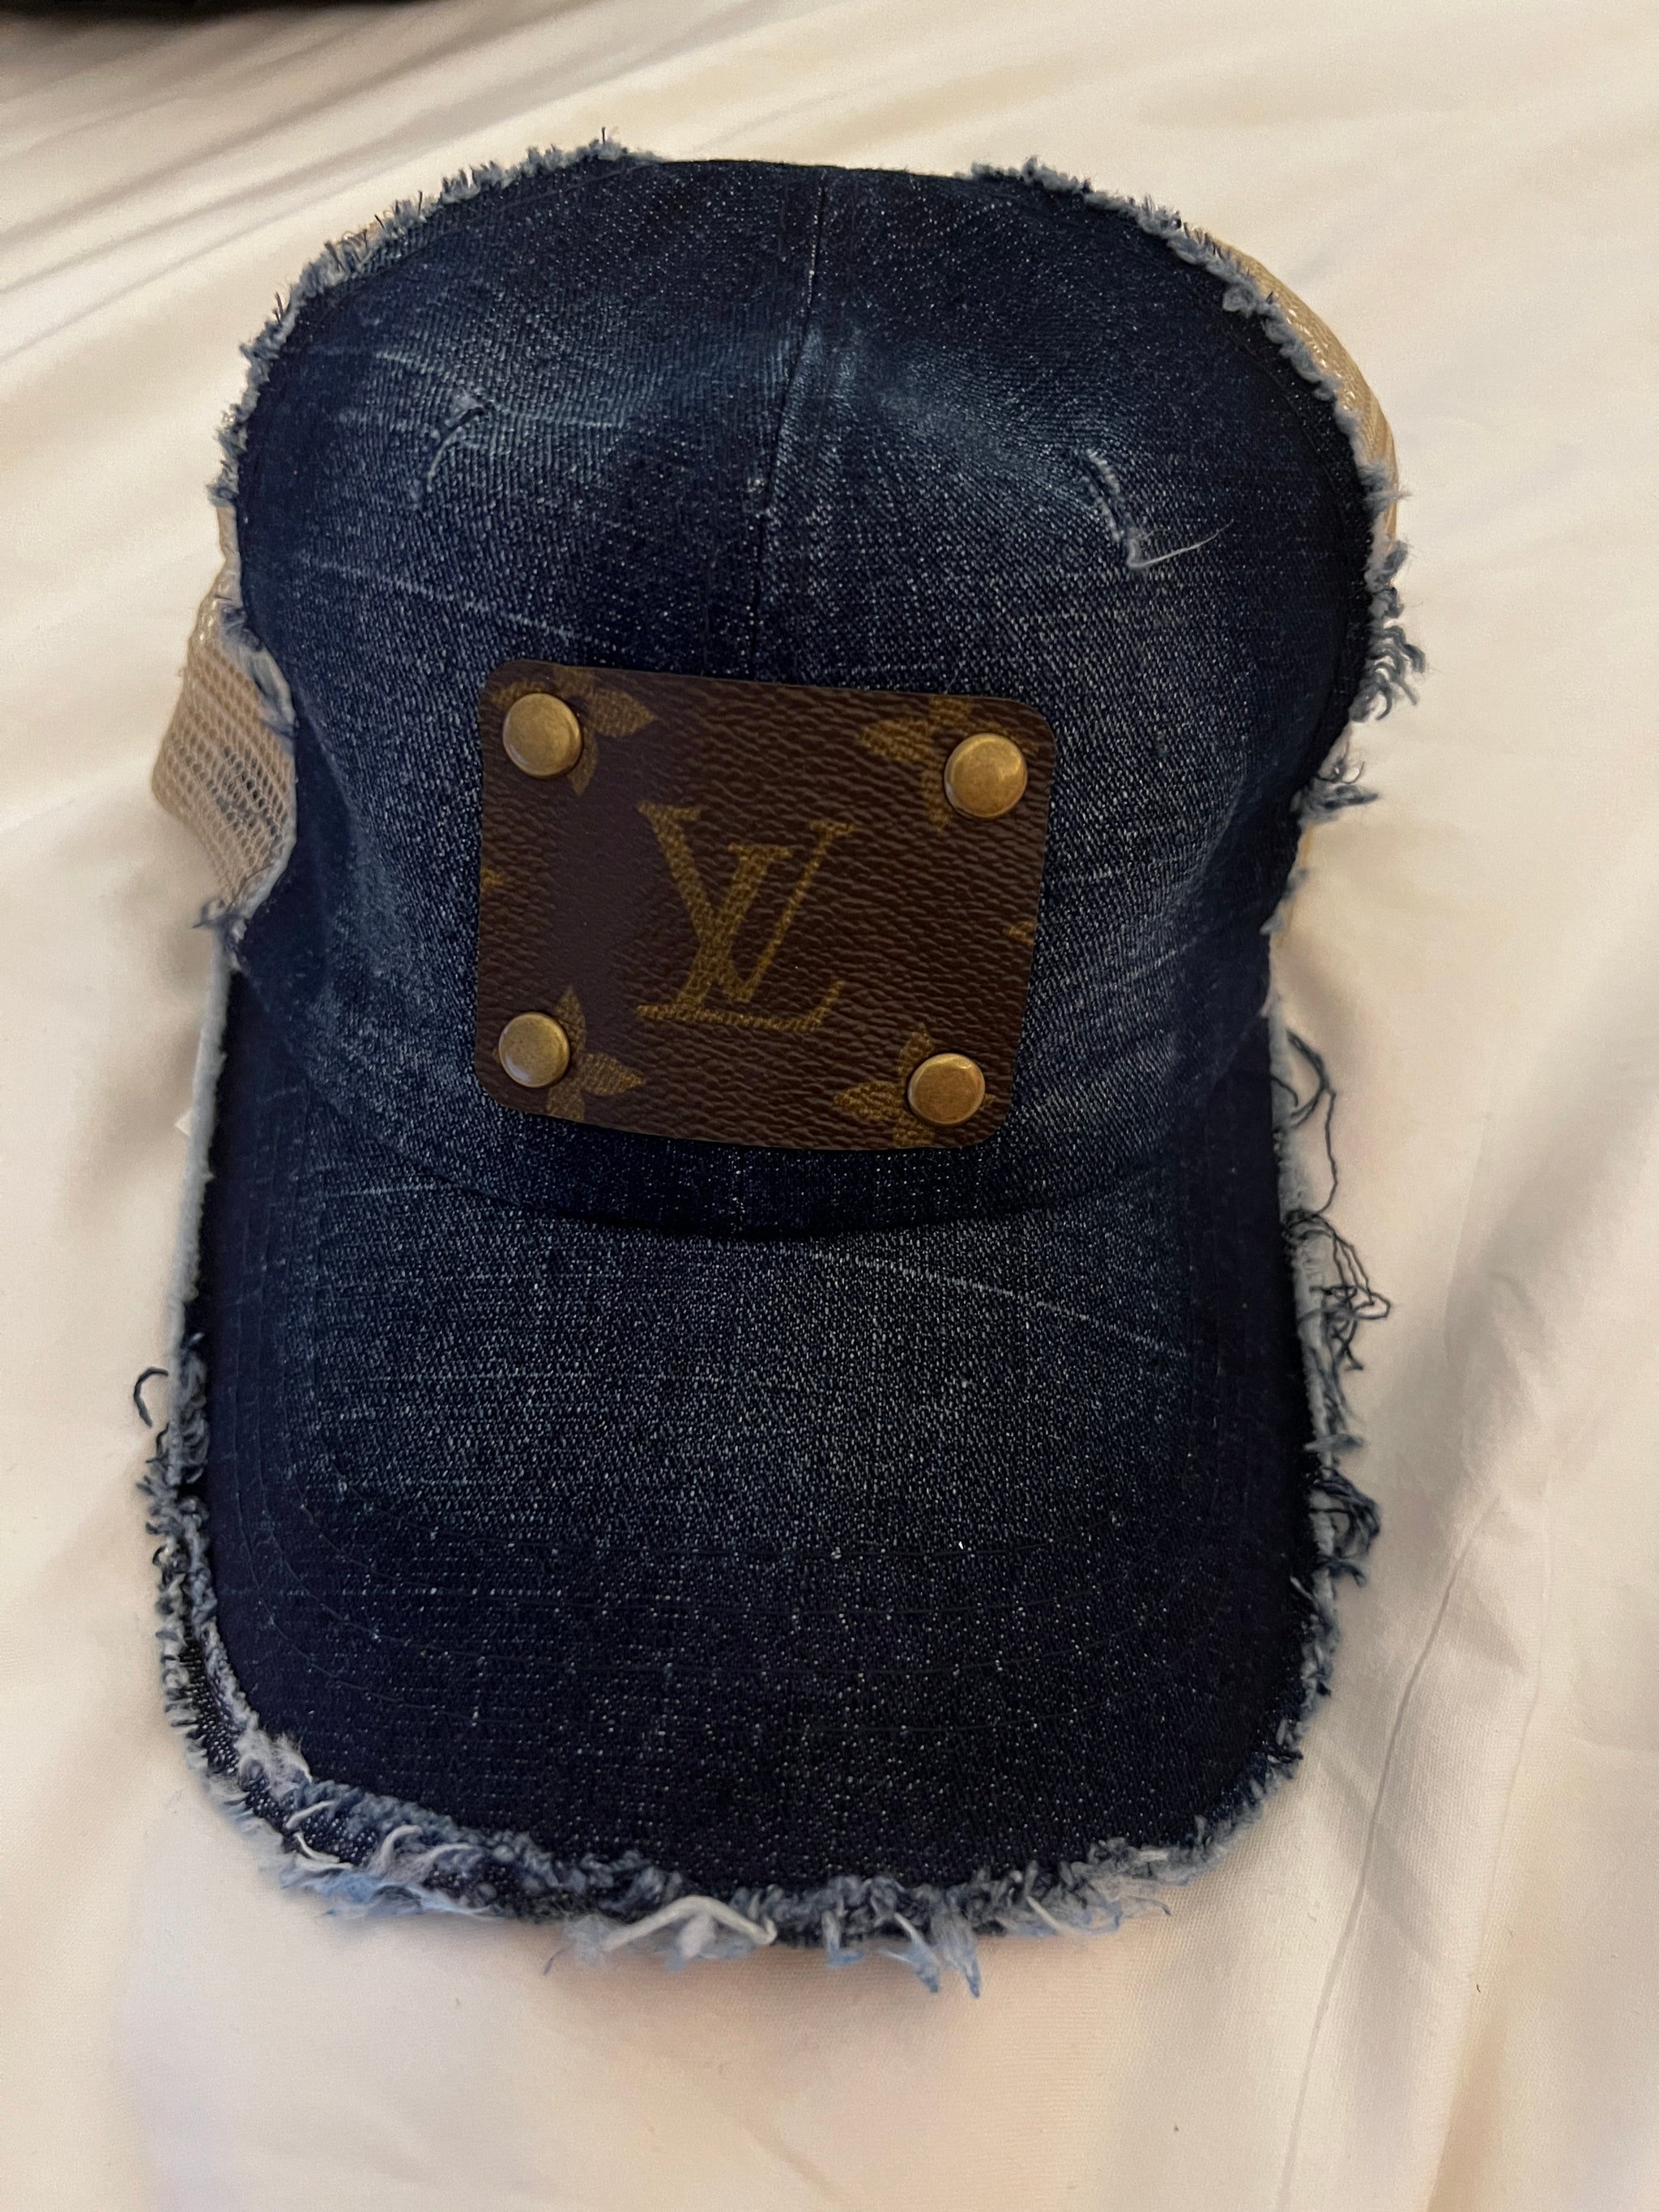 Upcycled Camo LV Hat  Louis vuitton hat, Upcycled purse, Used louis vuitton